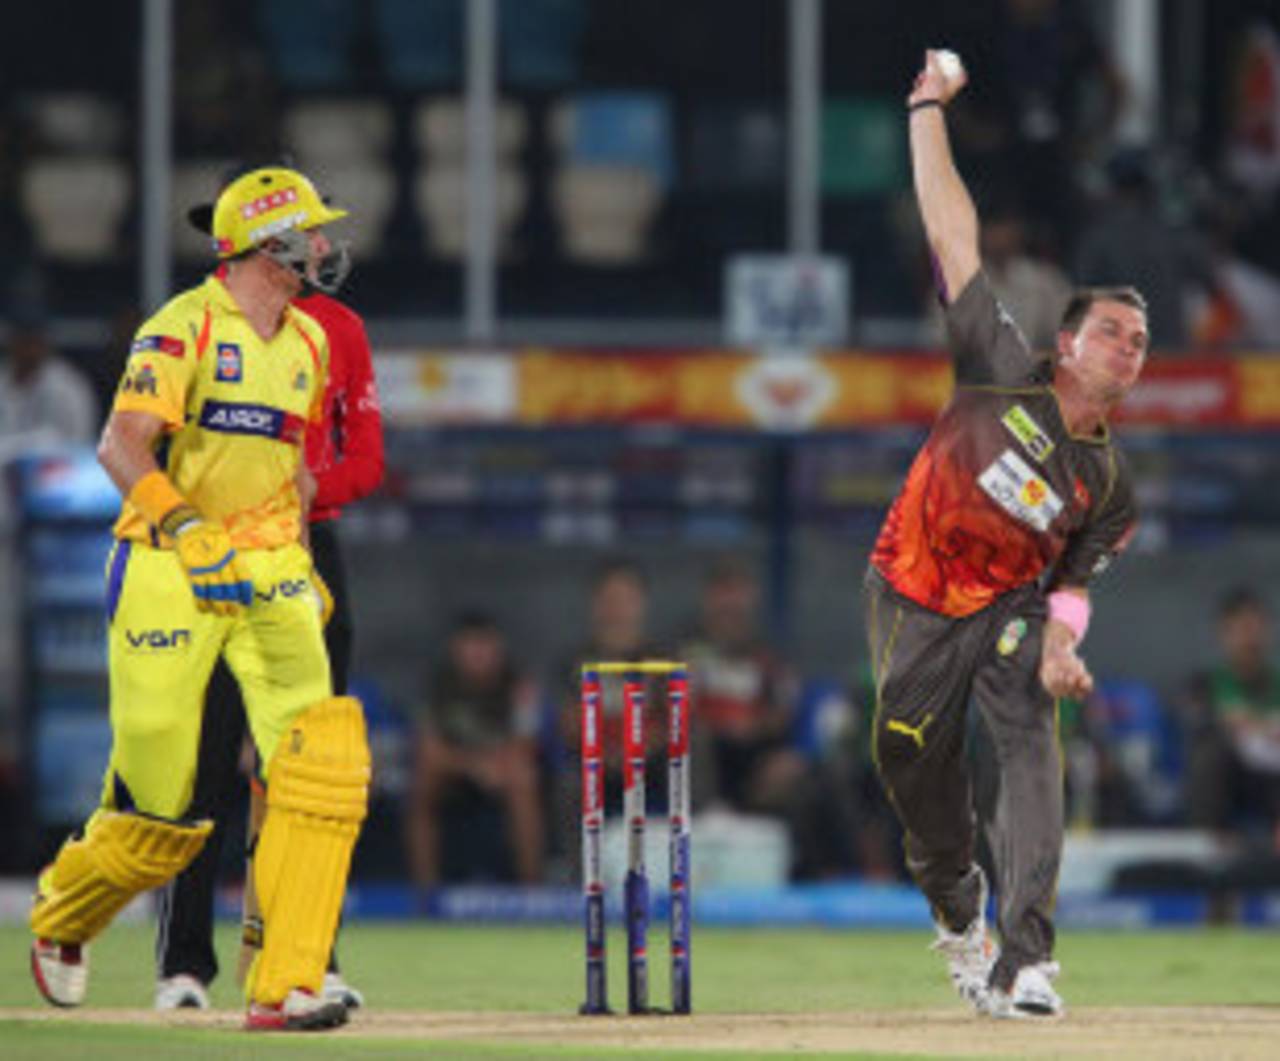 Dale Steyn was the most economical bowler for Sunrisers, Sunrisers Hyderabad v Chennai Super Kings, IPL 2013, Hyderabad, May 8, 2013